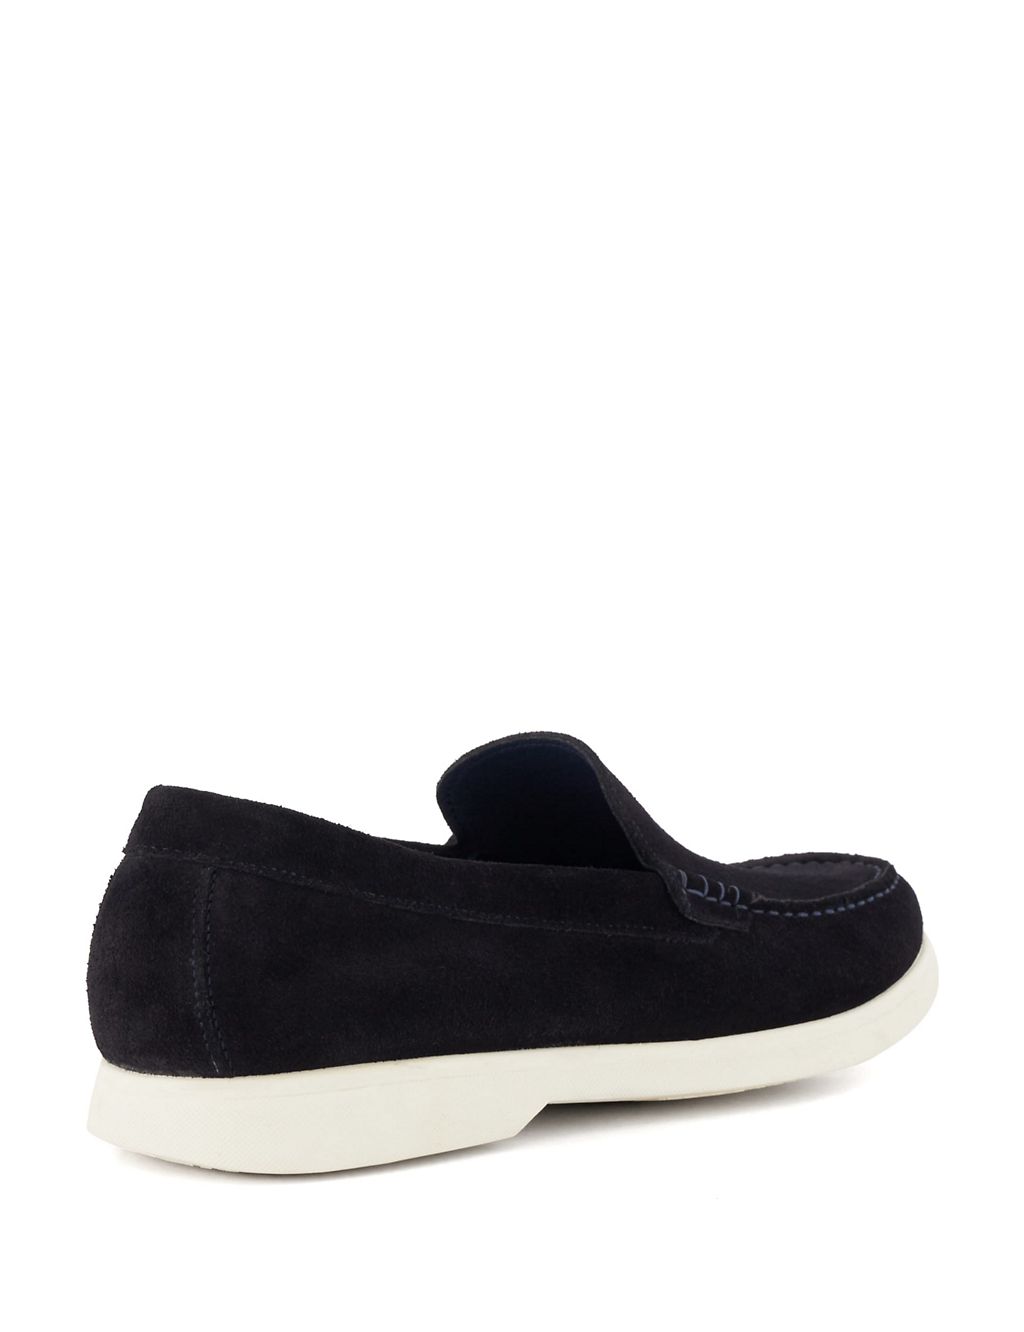 Suede Slip-On Loafers 2 of 6